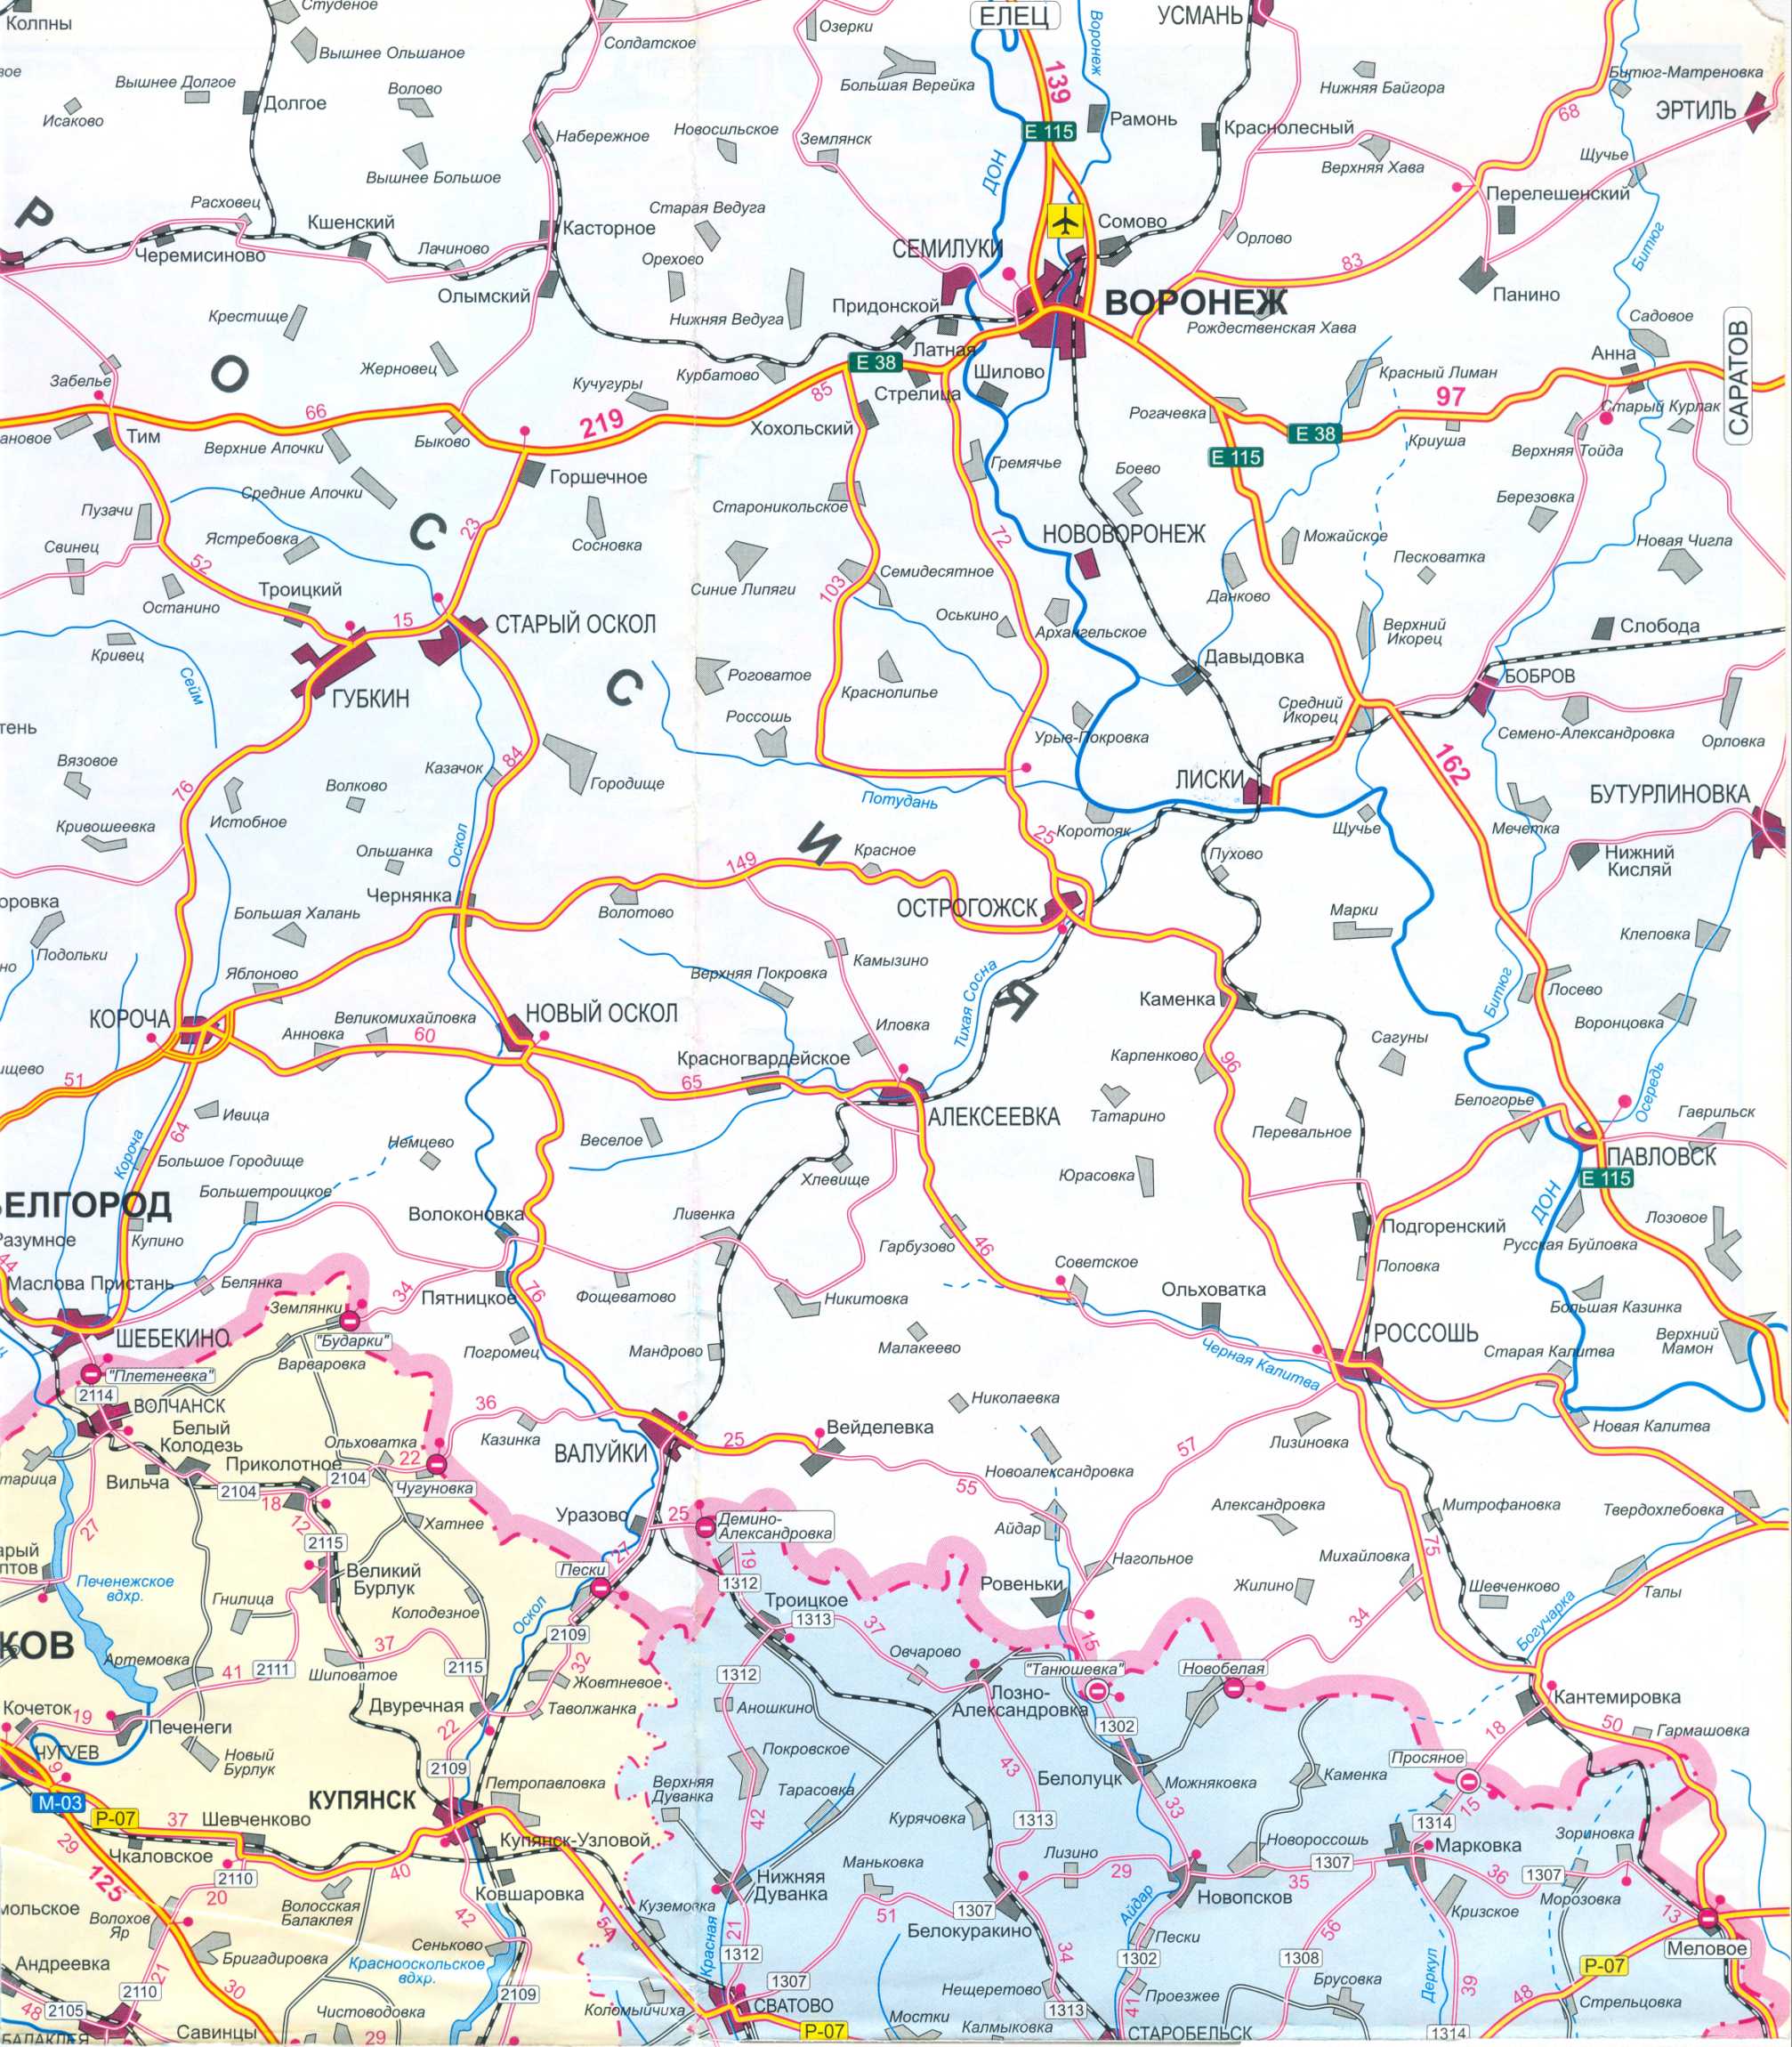 The map of Ukraine is free of charge. Map of roads of Ukraine free download. Large map of Ukraine's roads for free, E0